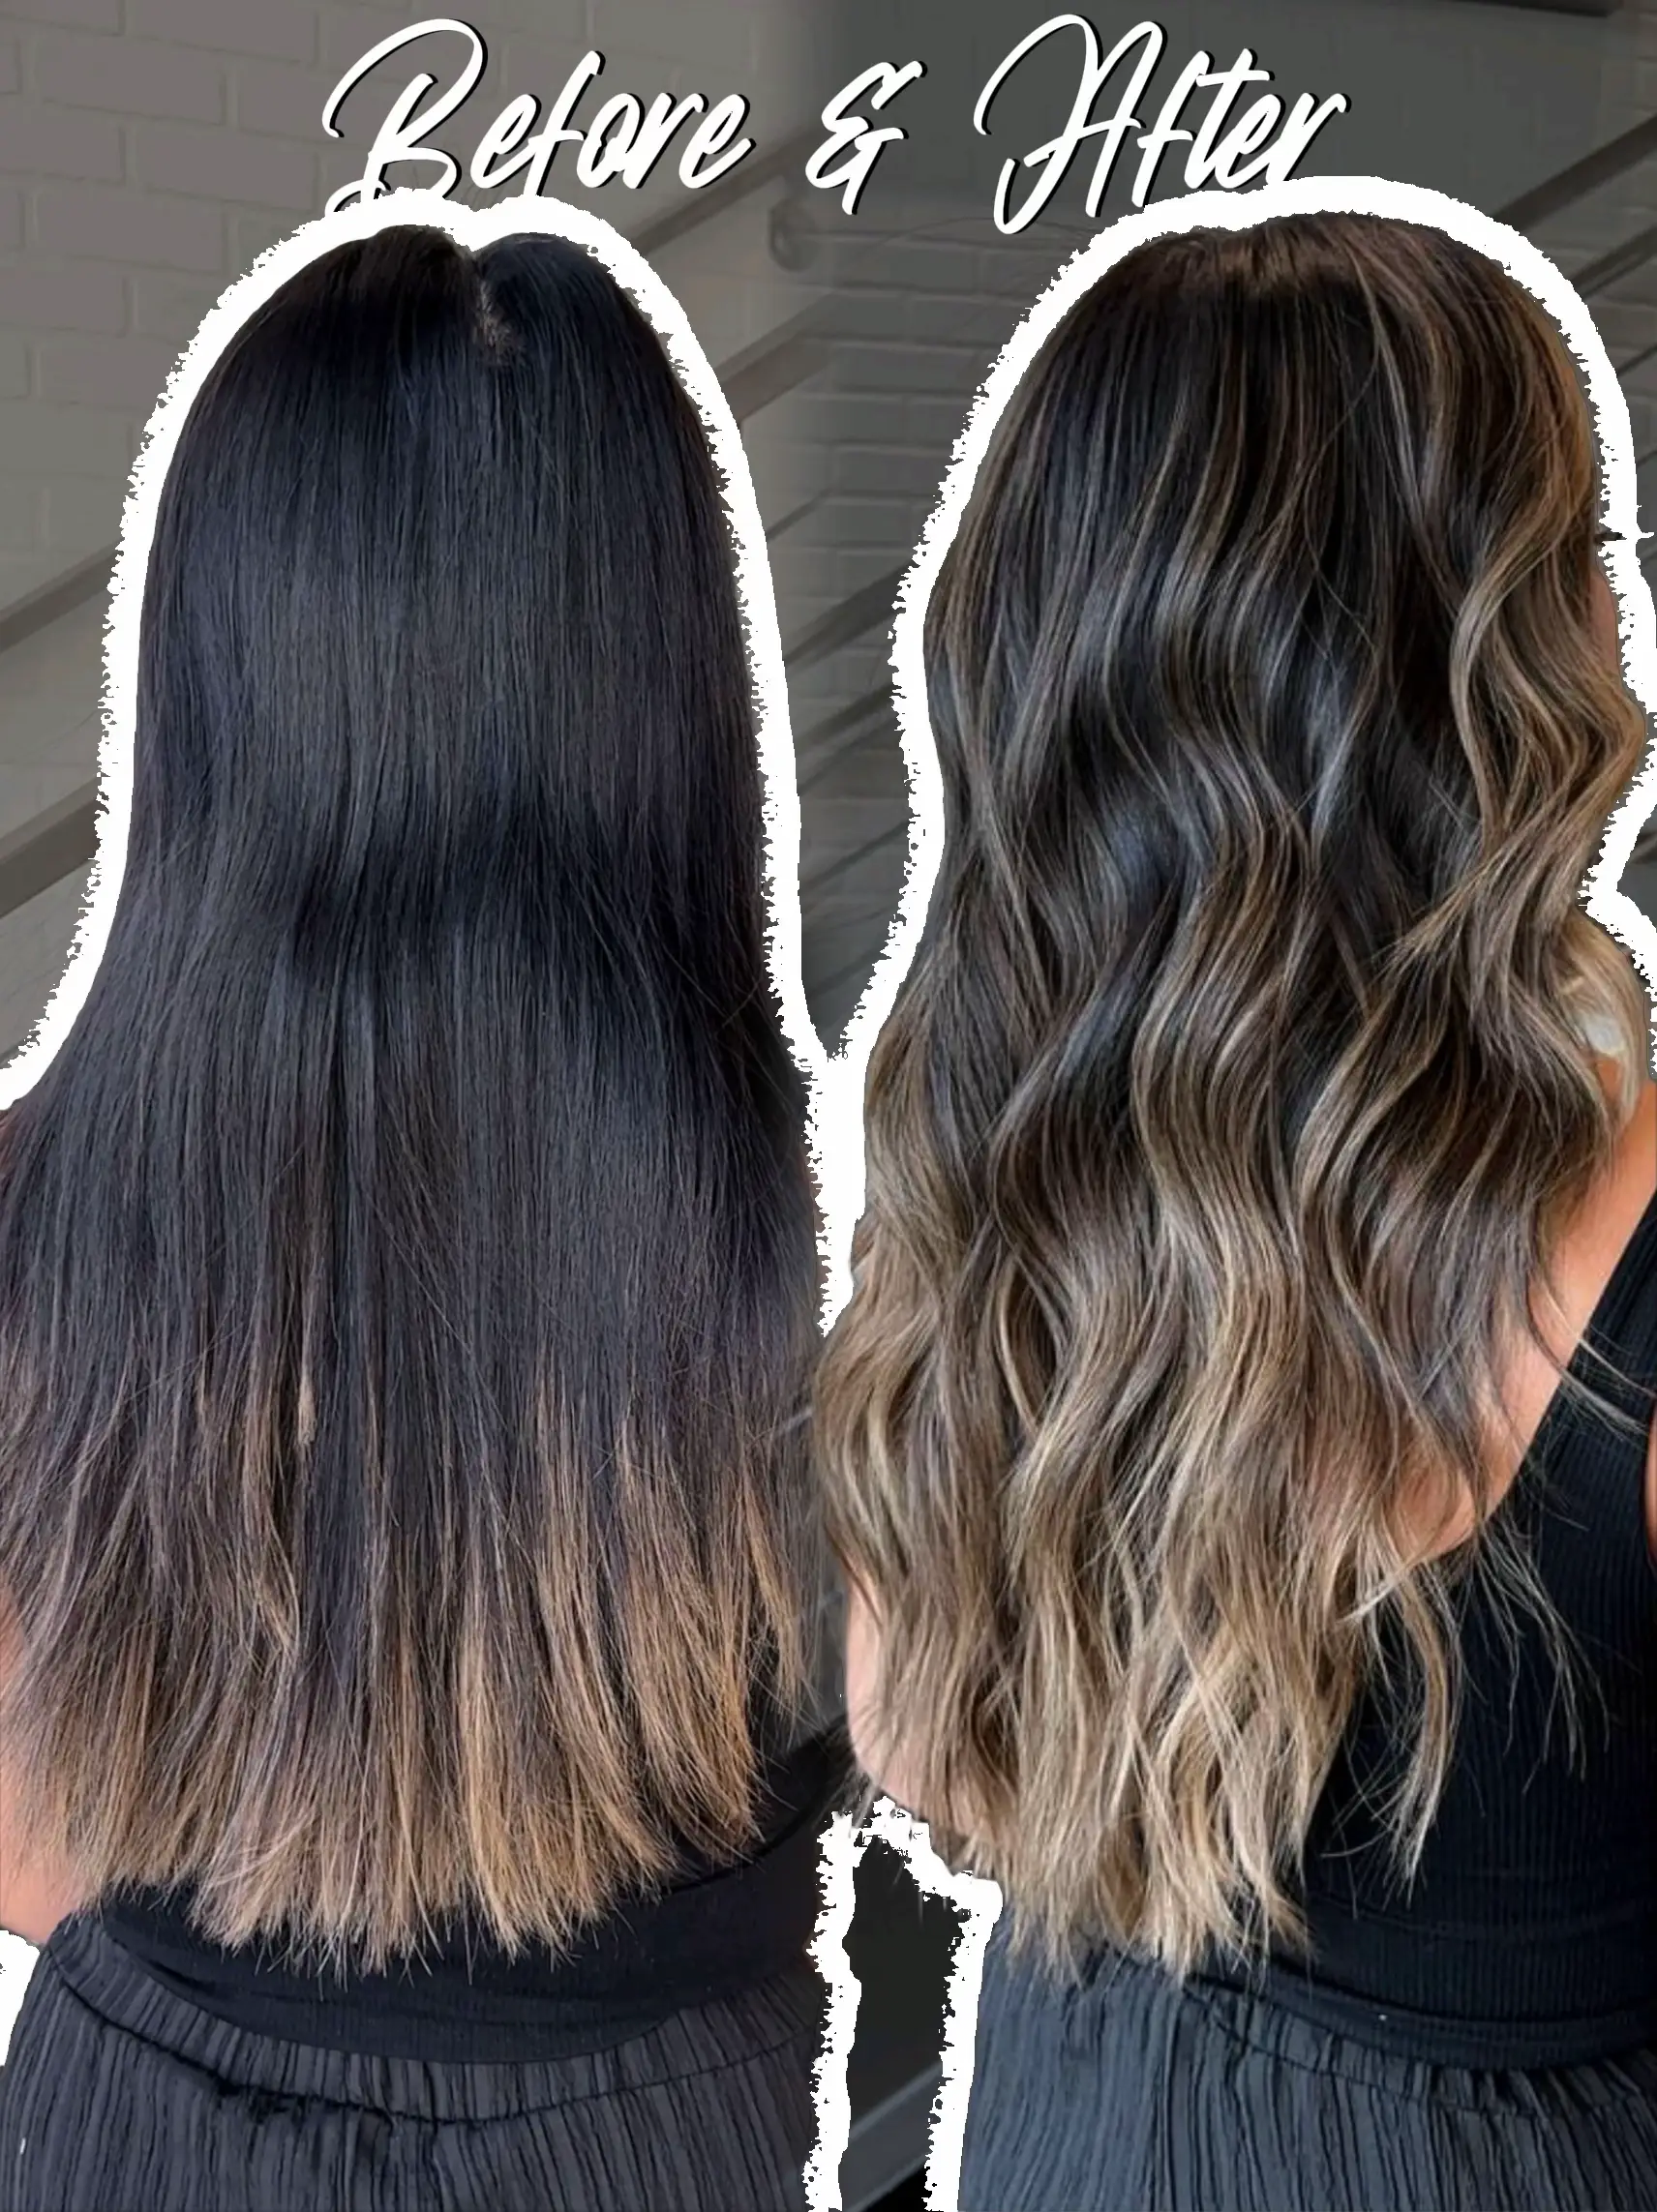 Black Hair With Highlights: 20+ Trendiest Looks and Ideas  Black hair  balayage, White hair highlights, Black hair with highlights